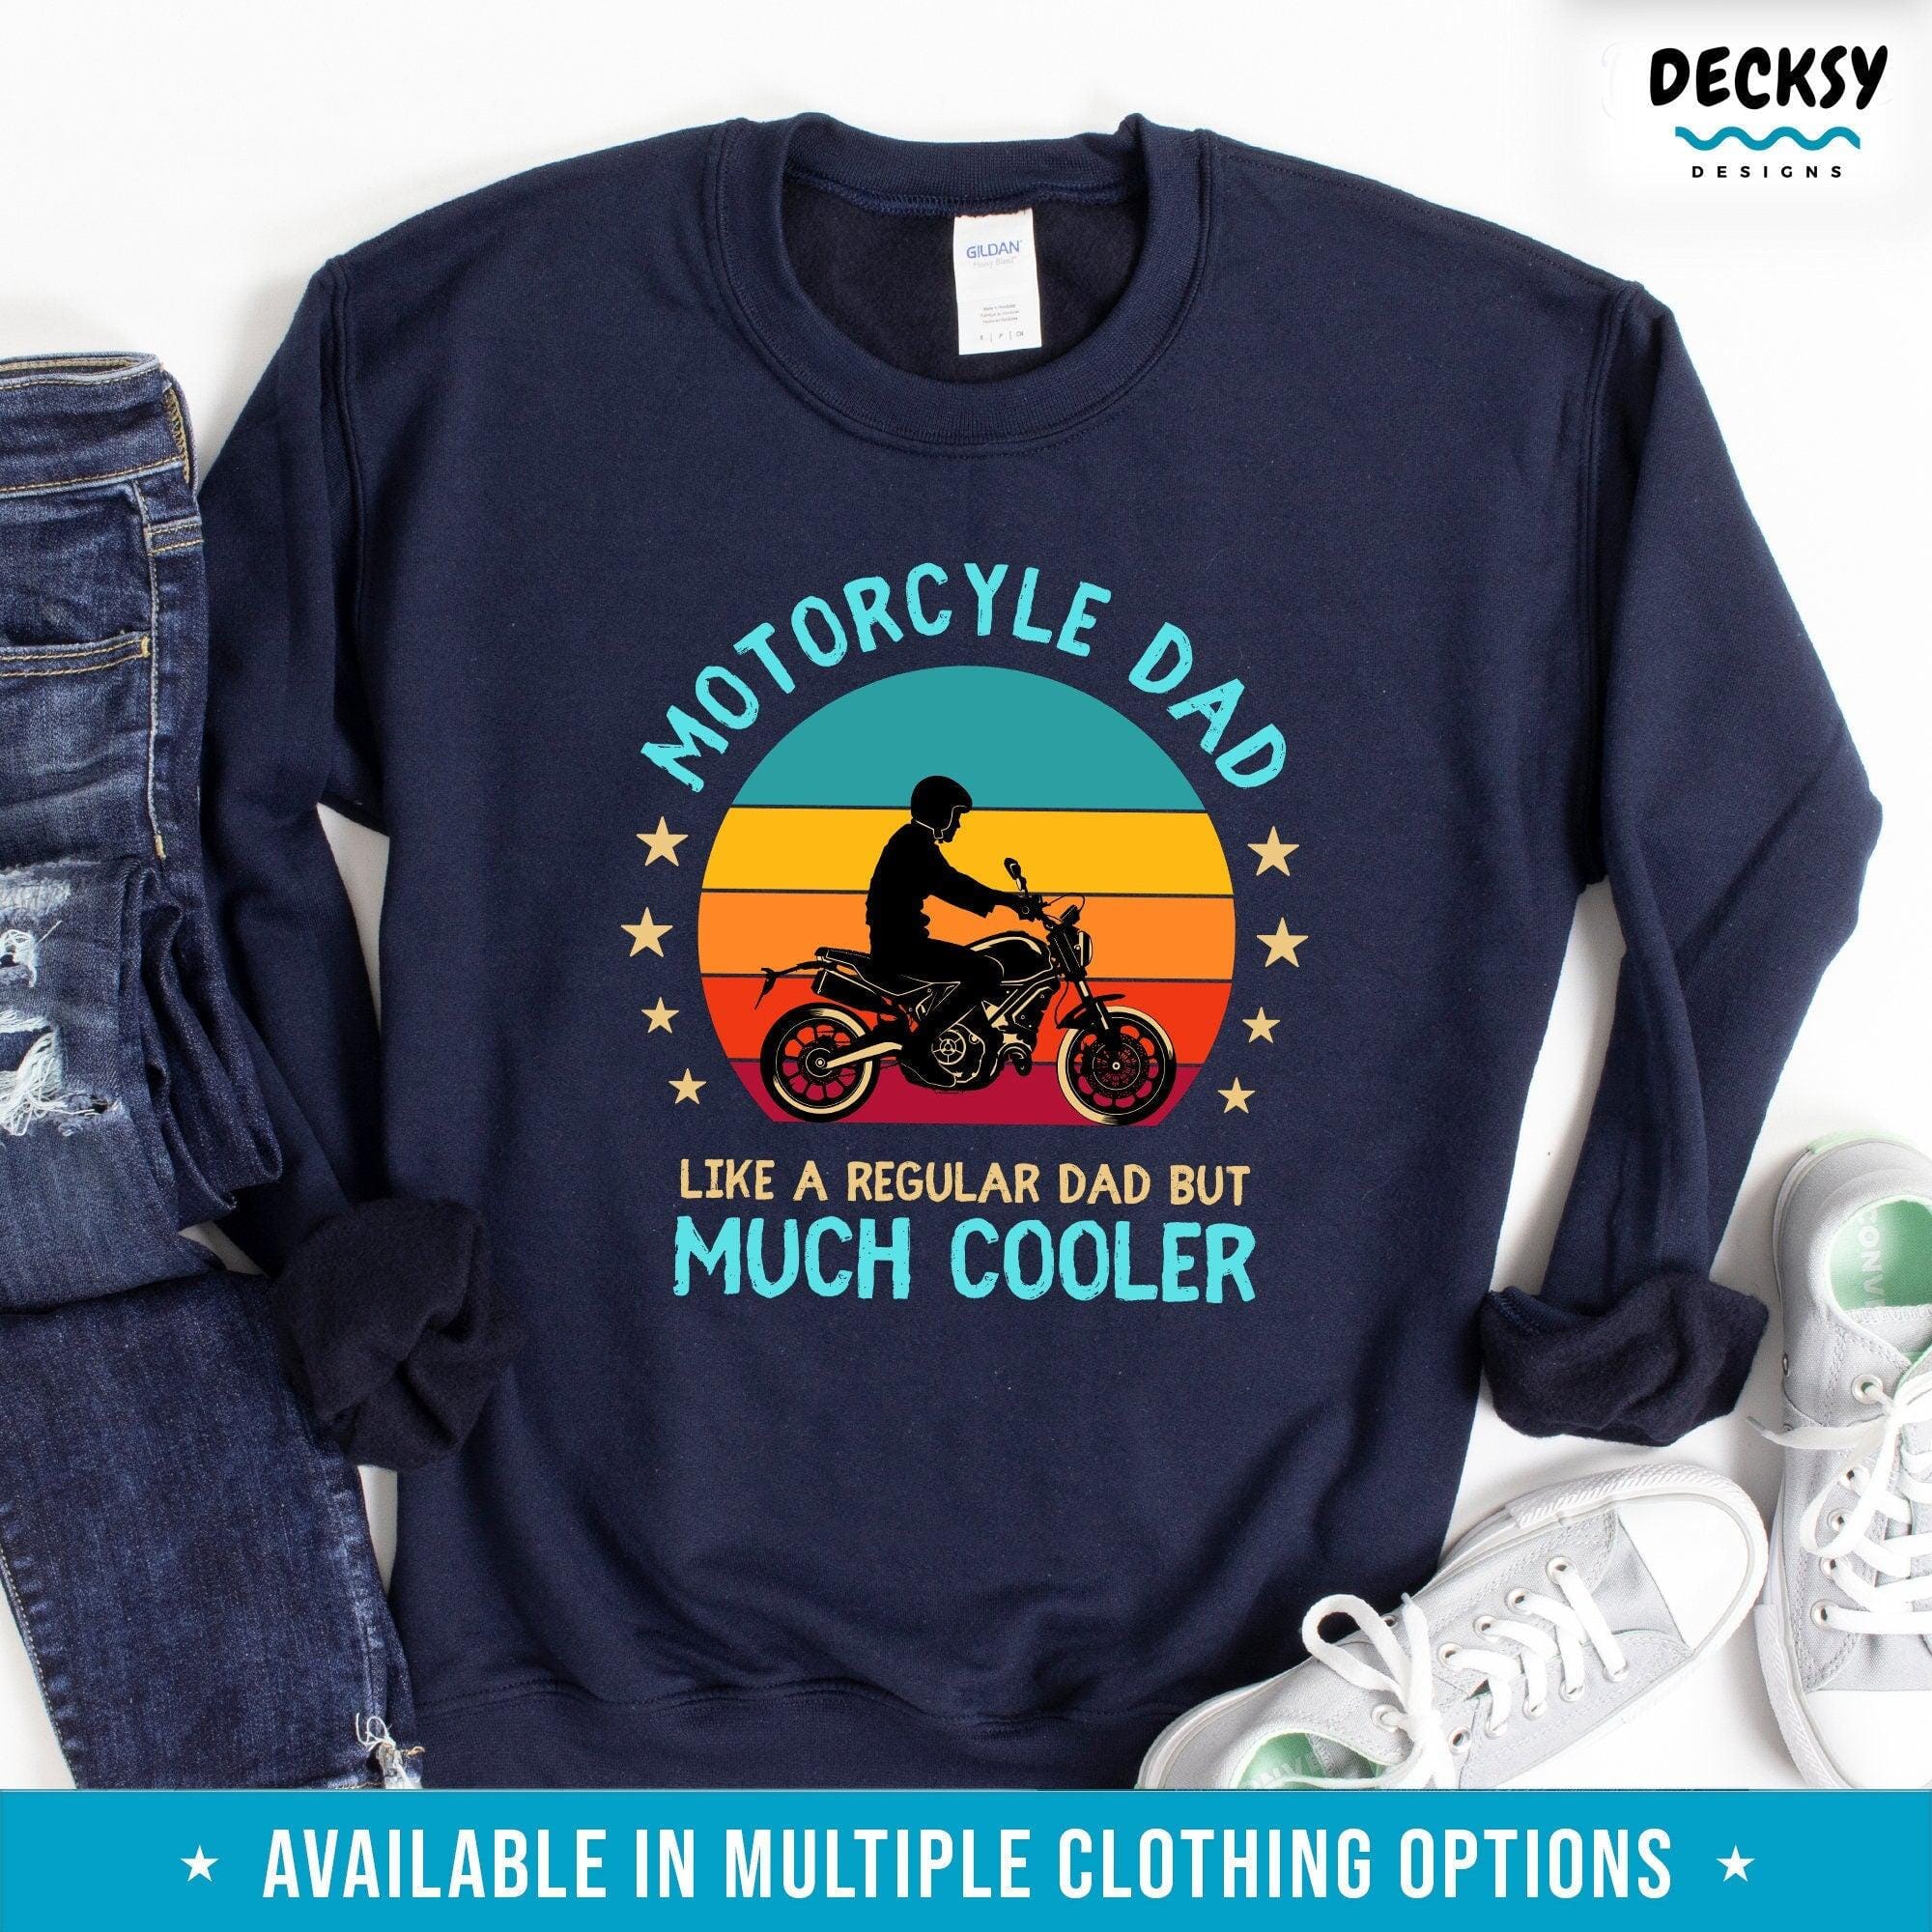 Motorcycle Dad Shirt, Motorcycle Gift For Men-Clothing:Gender-Neutral Adult Clothing:Tops & Tees:T-shirts:Graphic Tees-DecksyDesigns